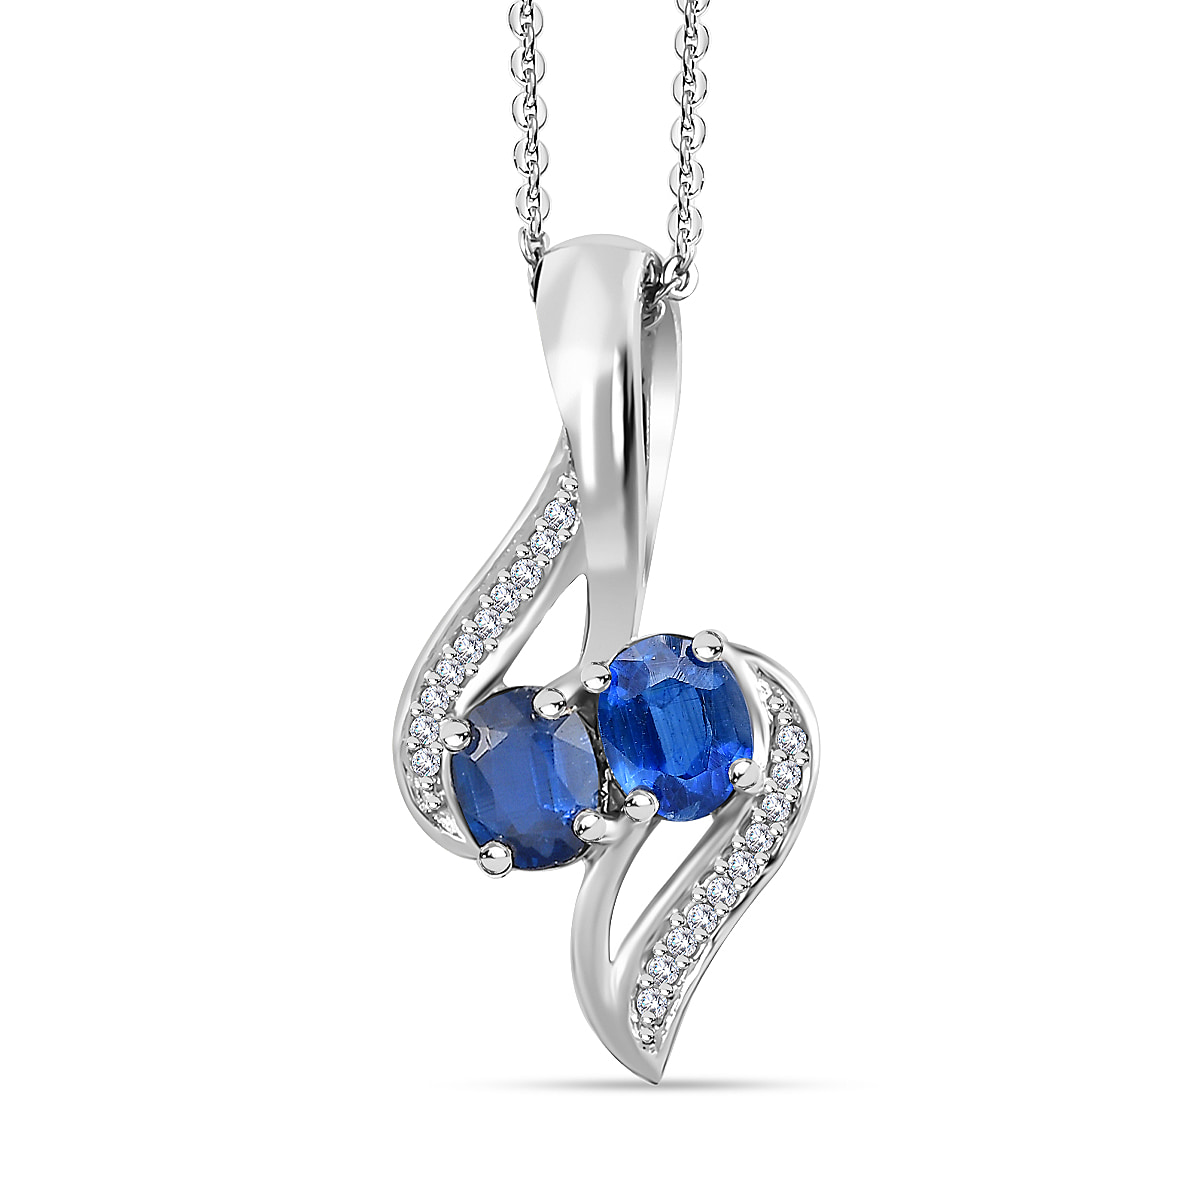 Natural Himalayan Kyanite & White Zircon Pendant with Chain (Size 20) in Platinum Overlay Sterling Silver 1.10 Ct.